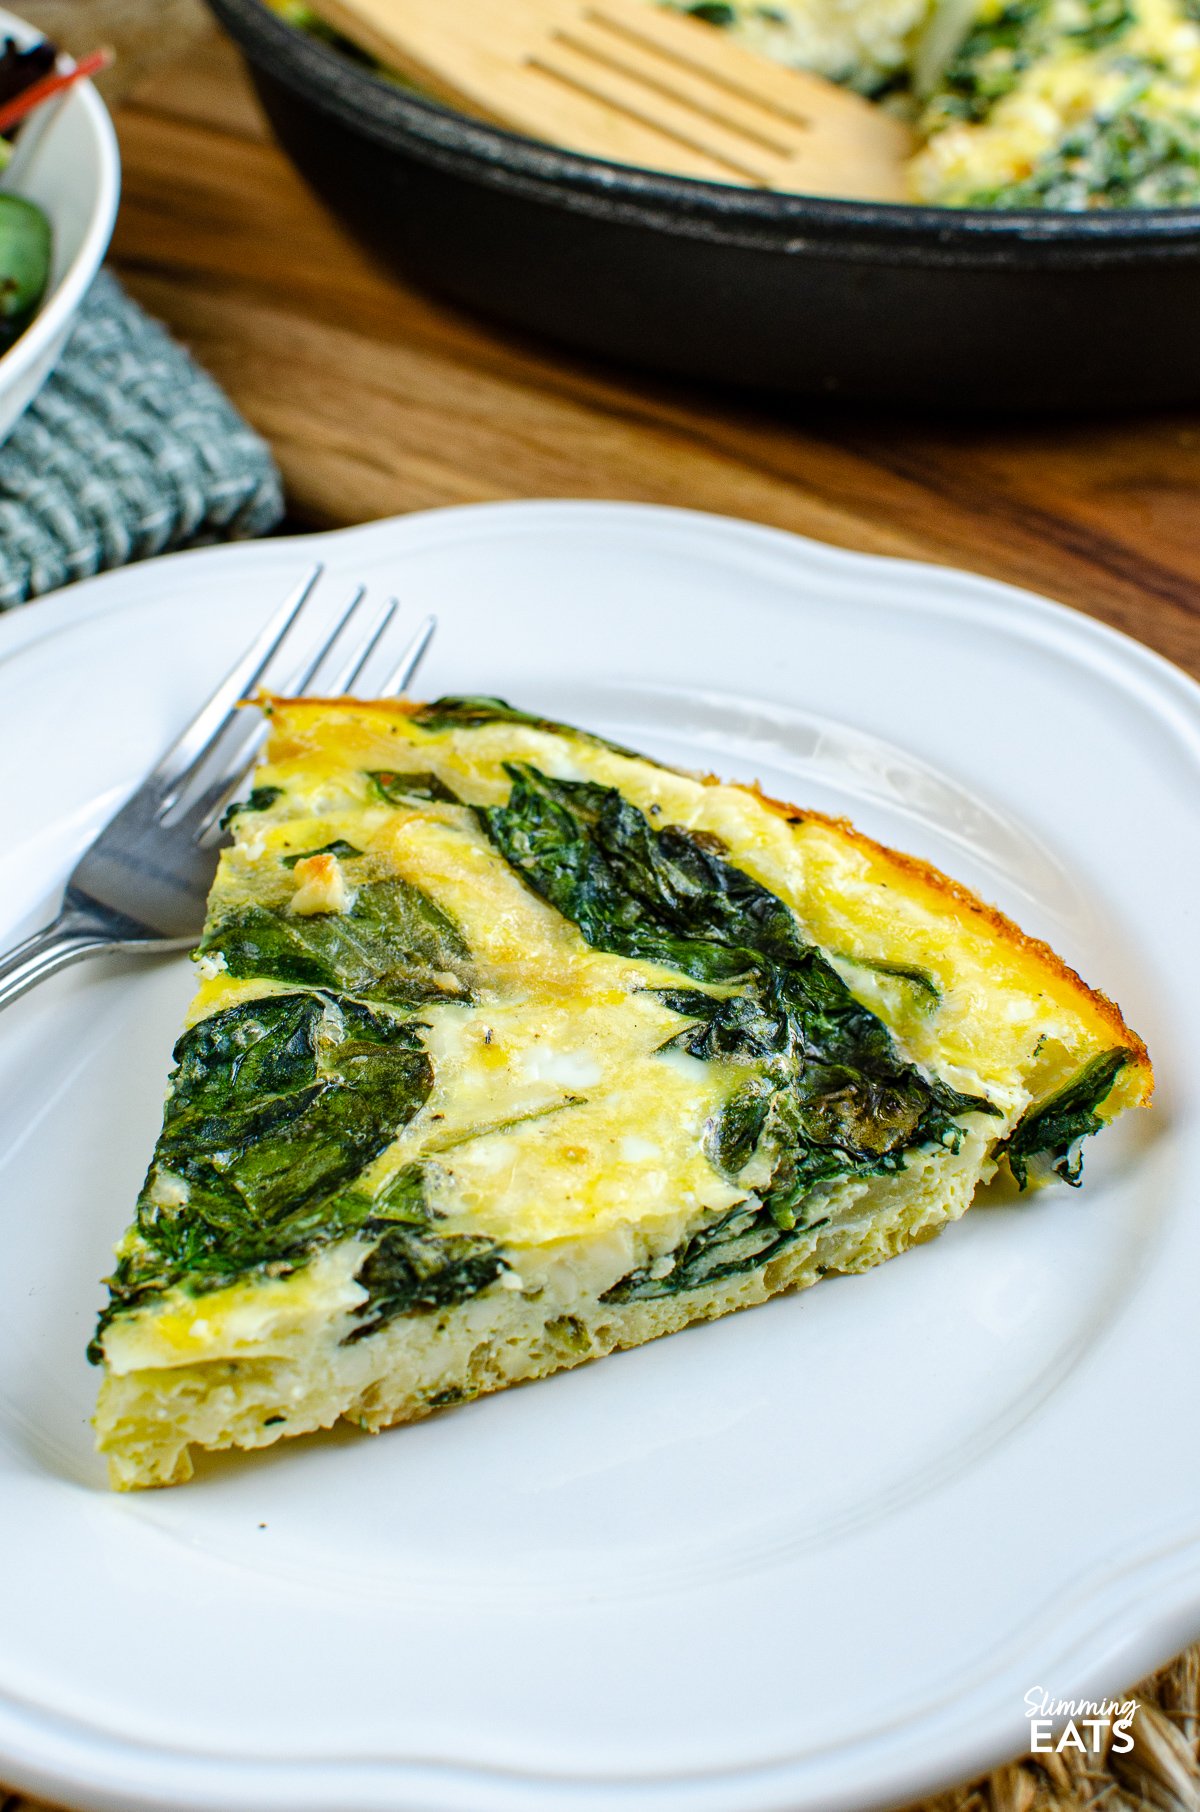 slice of Spinach and Feta Frittata on a white plate, accompanied by skillet with remaining slices in background